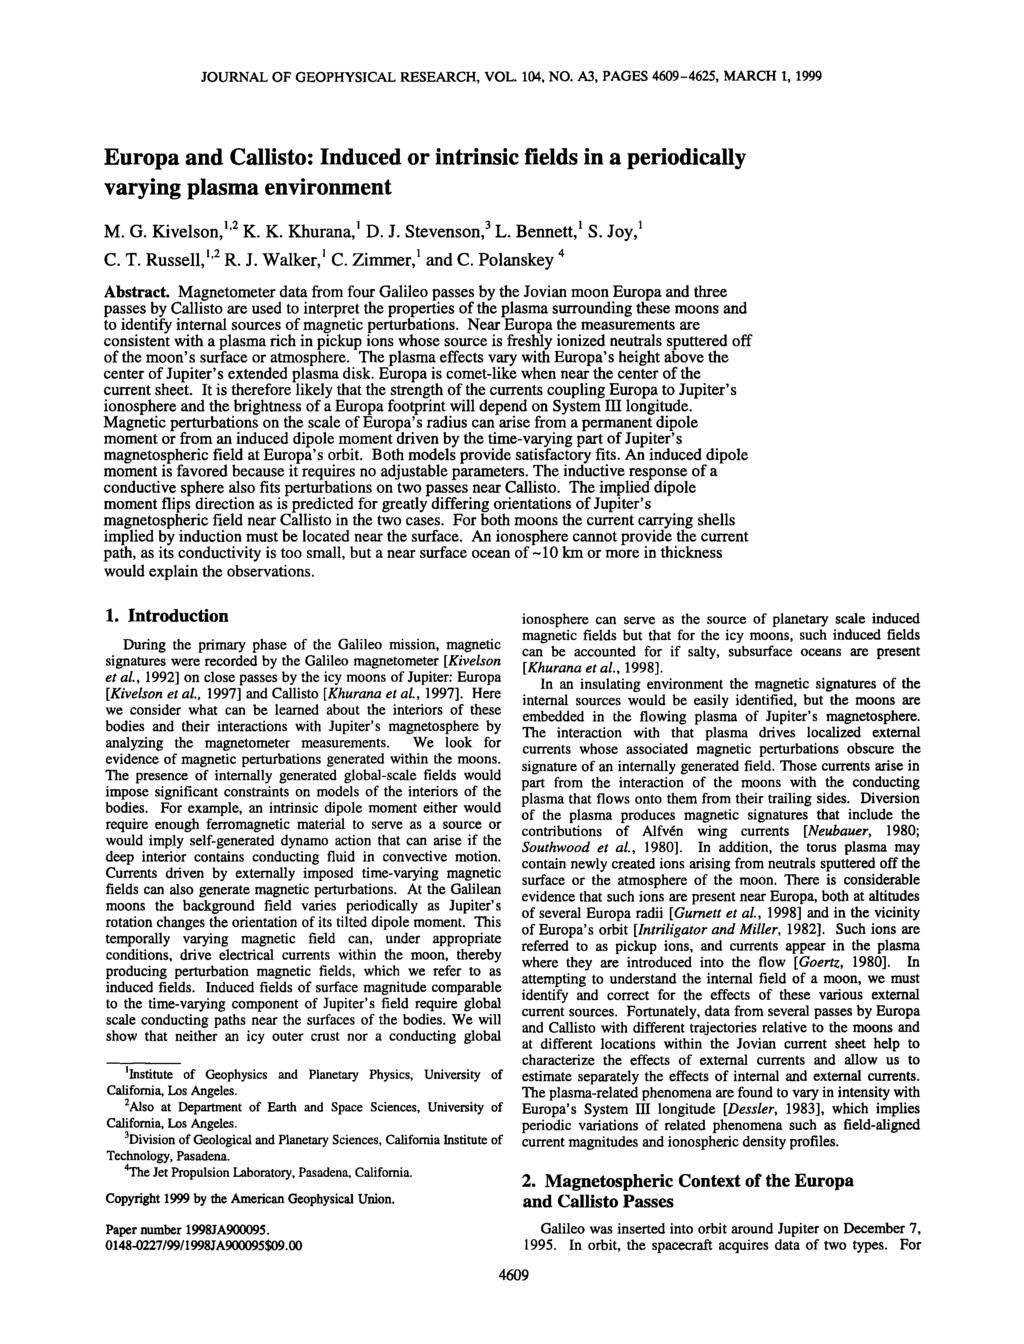 JOURNAL OF GEOPHYSICAL RESEARCH, VOL. 104, NO. A3, PAGES 4609625, MARCH 1, 1999 Europa and Callisto: Induced or intrinsic fields in a periodically varying plasma environment M. G. Kivelson, '2 K. K. Khurana, D.